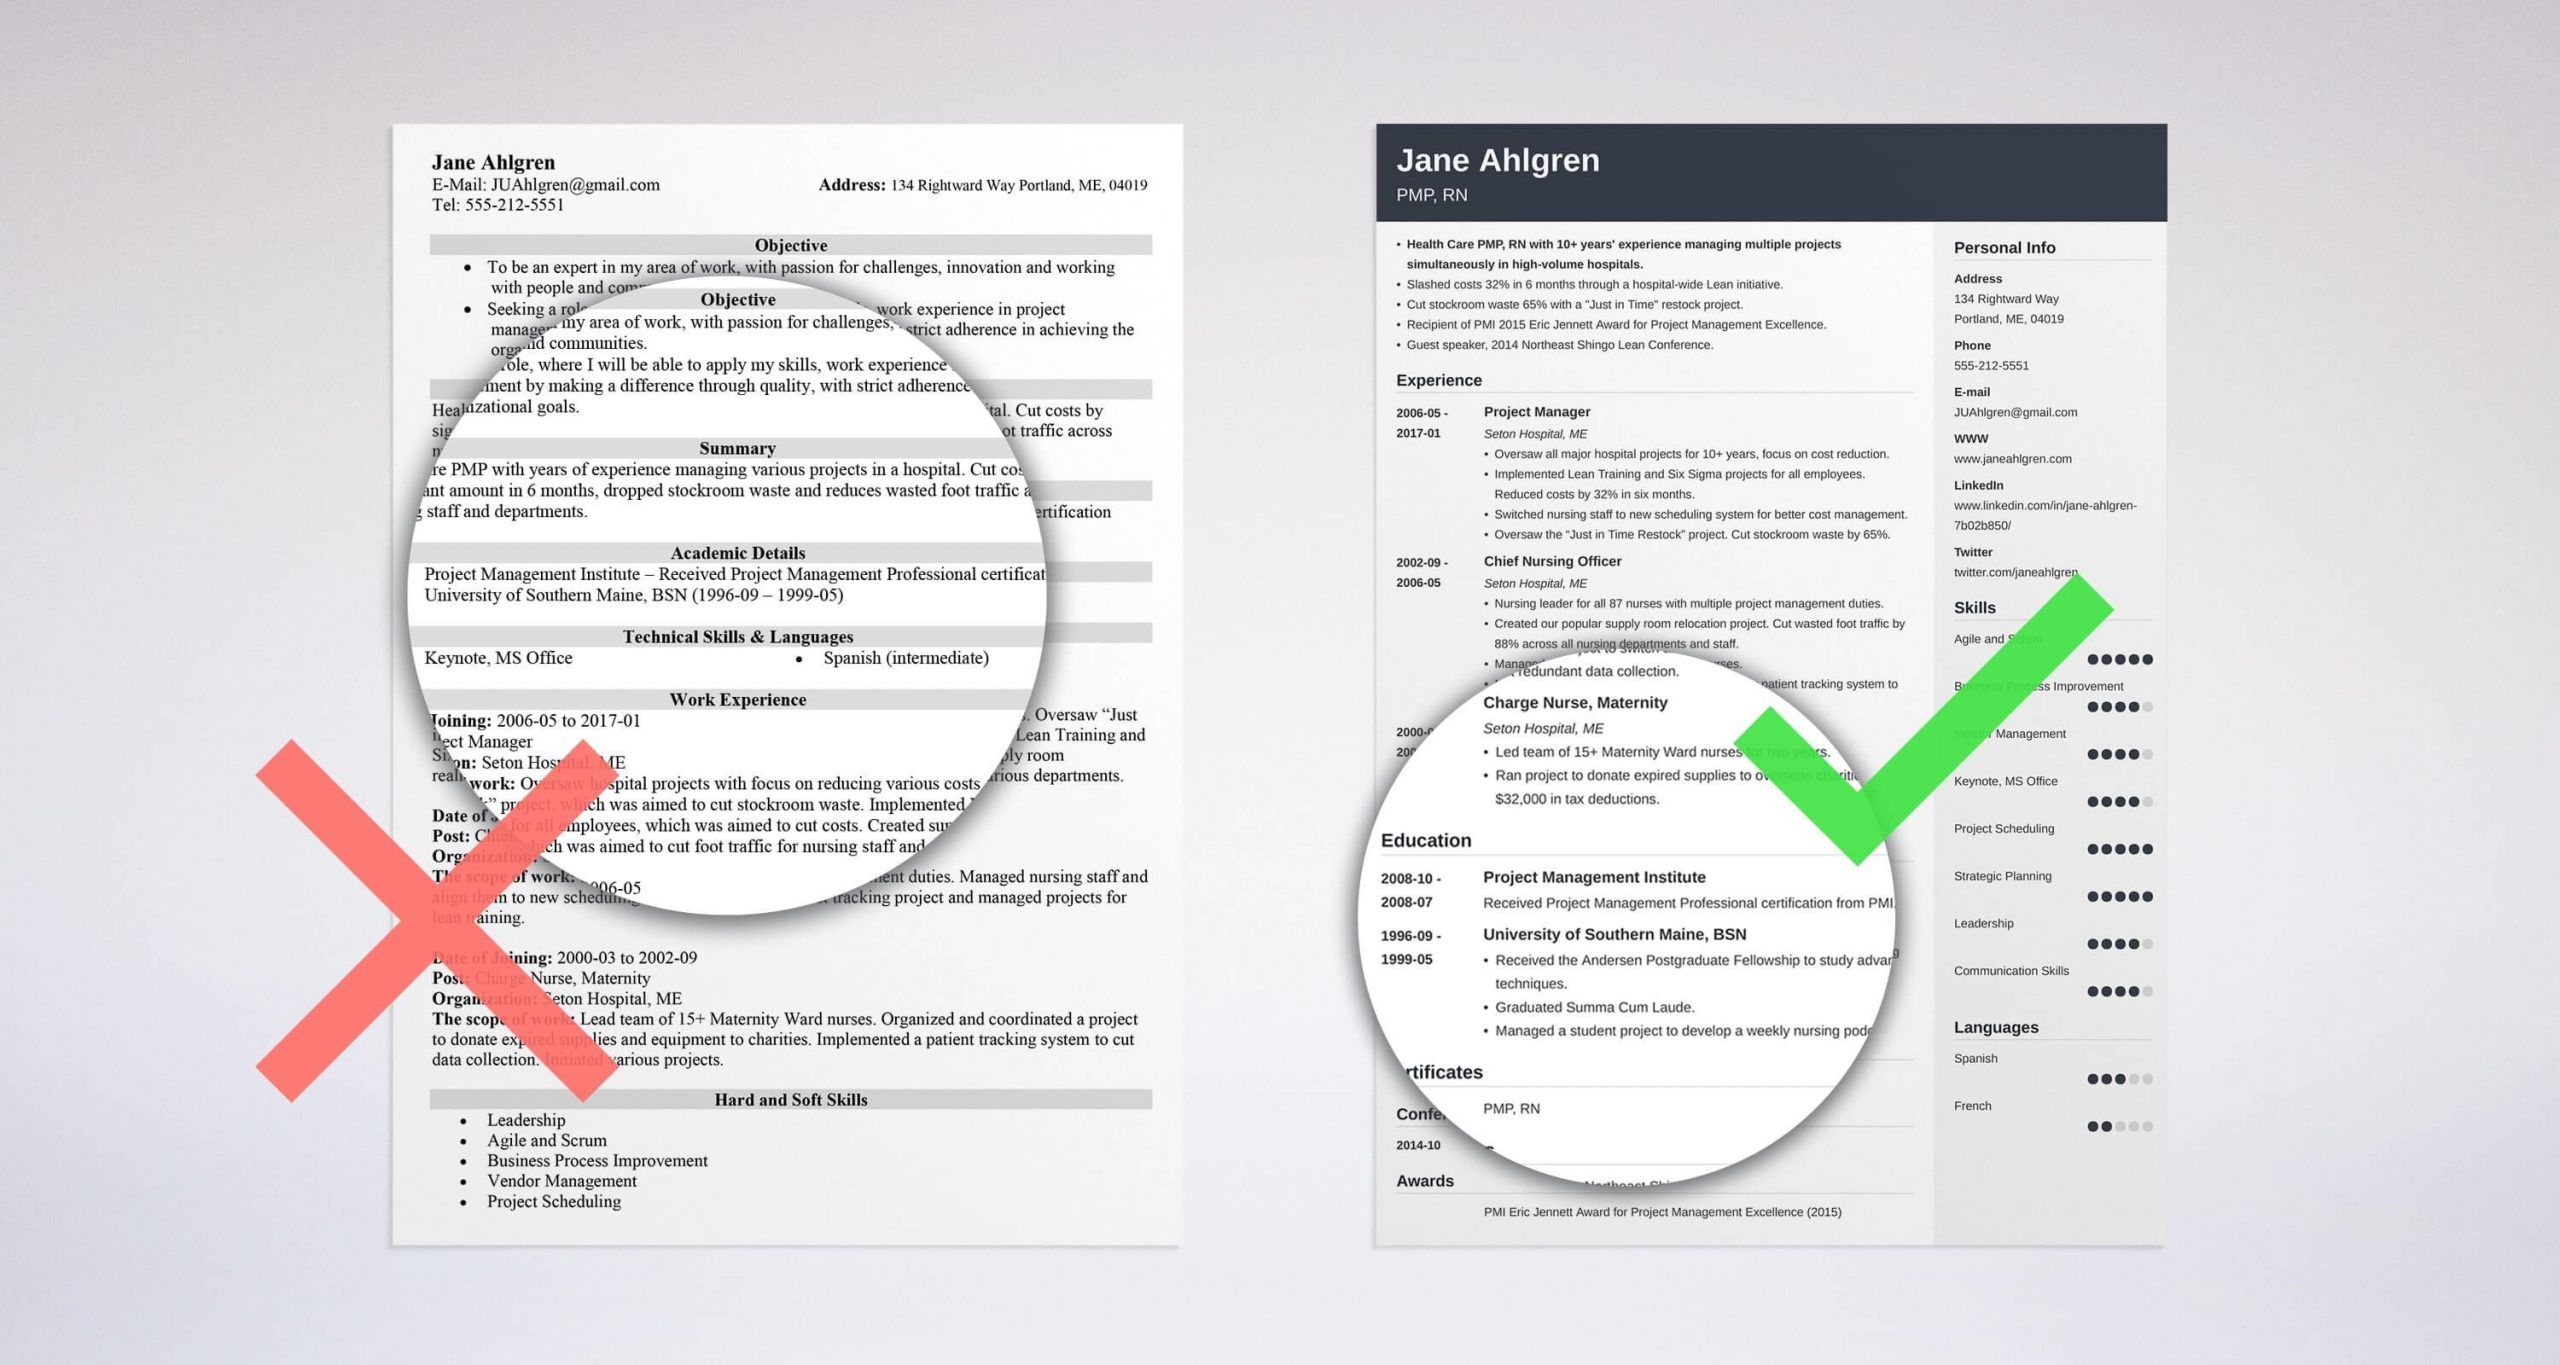 Degree In Progress On Resume Sample How to List Education On A Resume: Section Examples & Tips